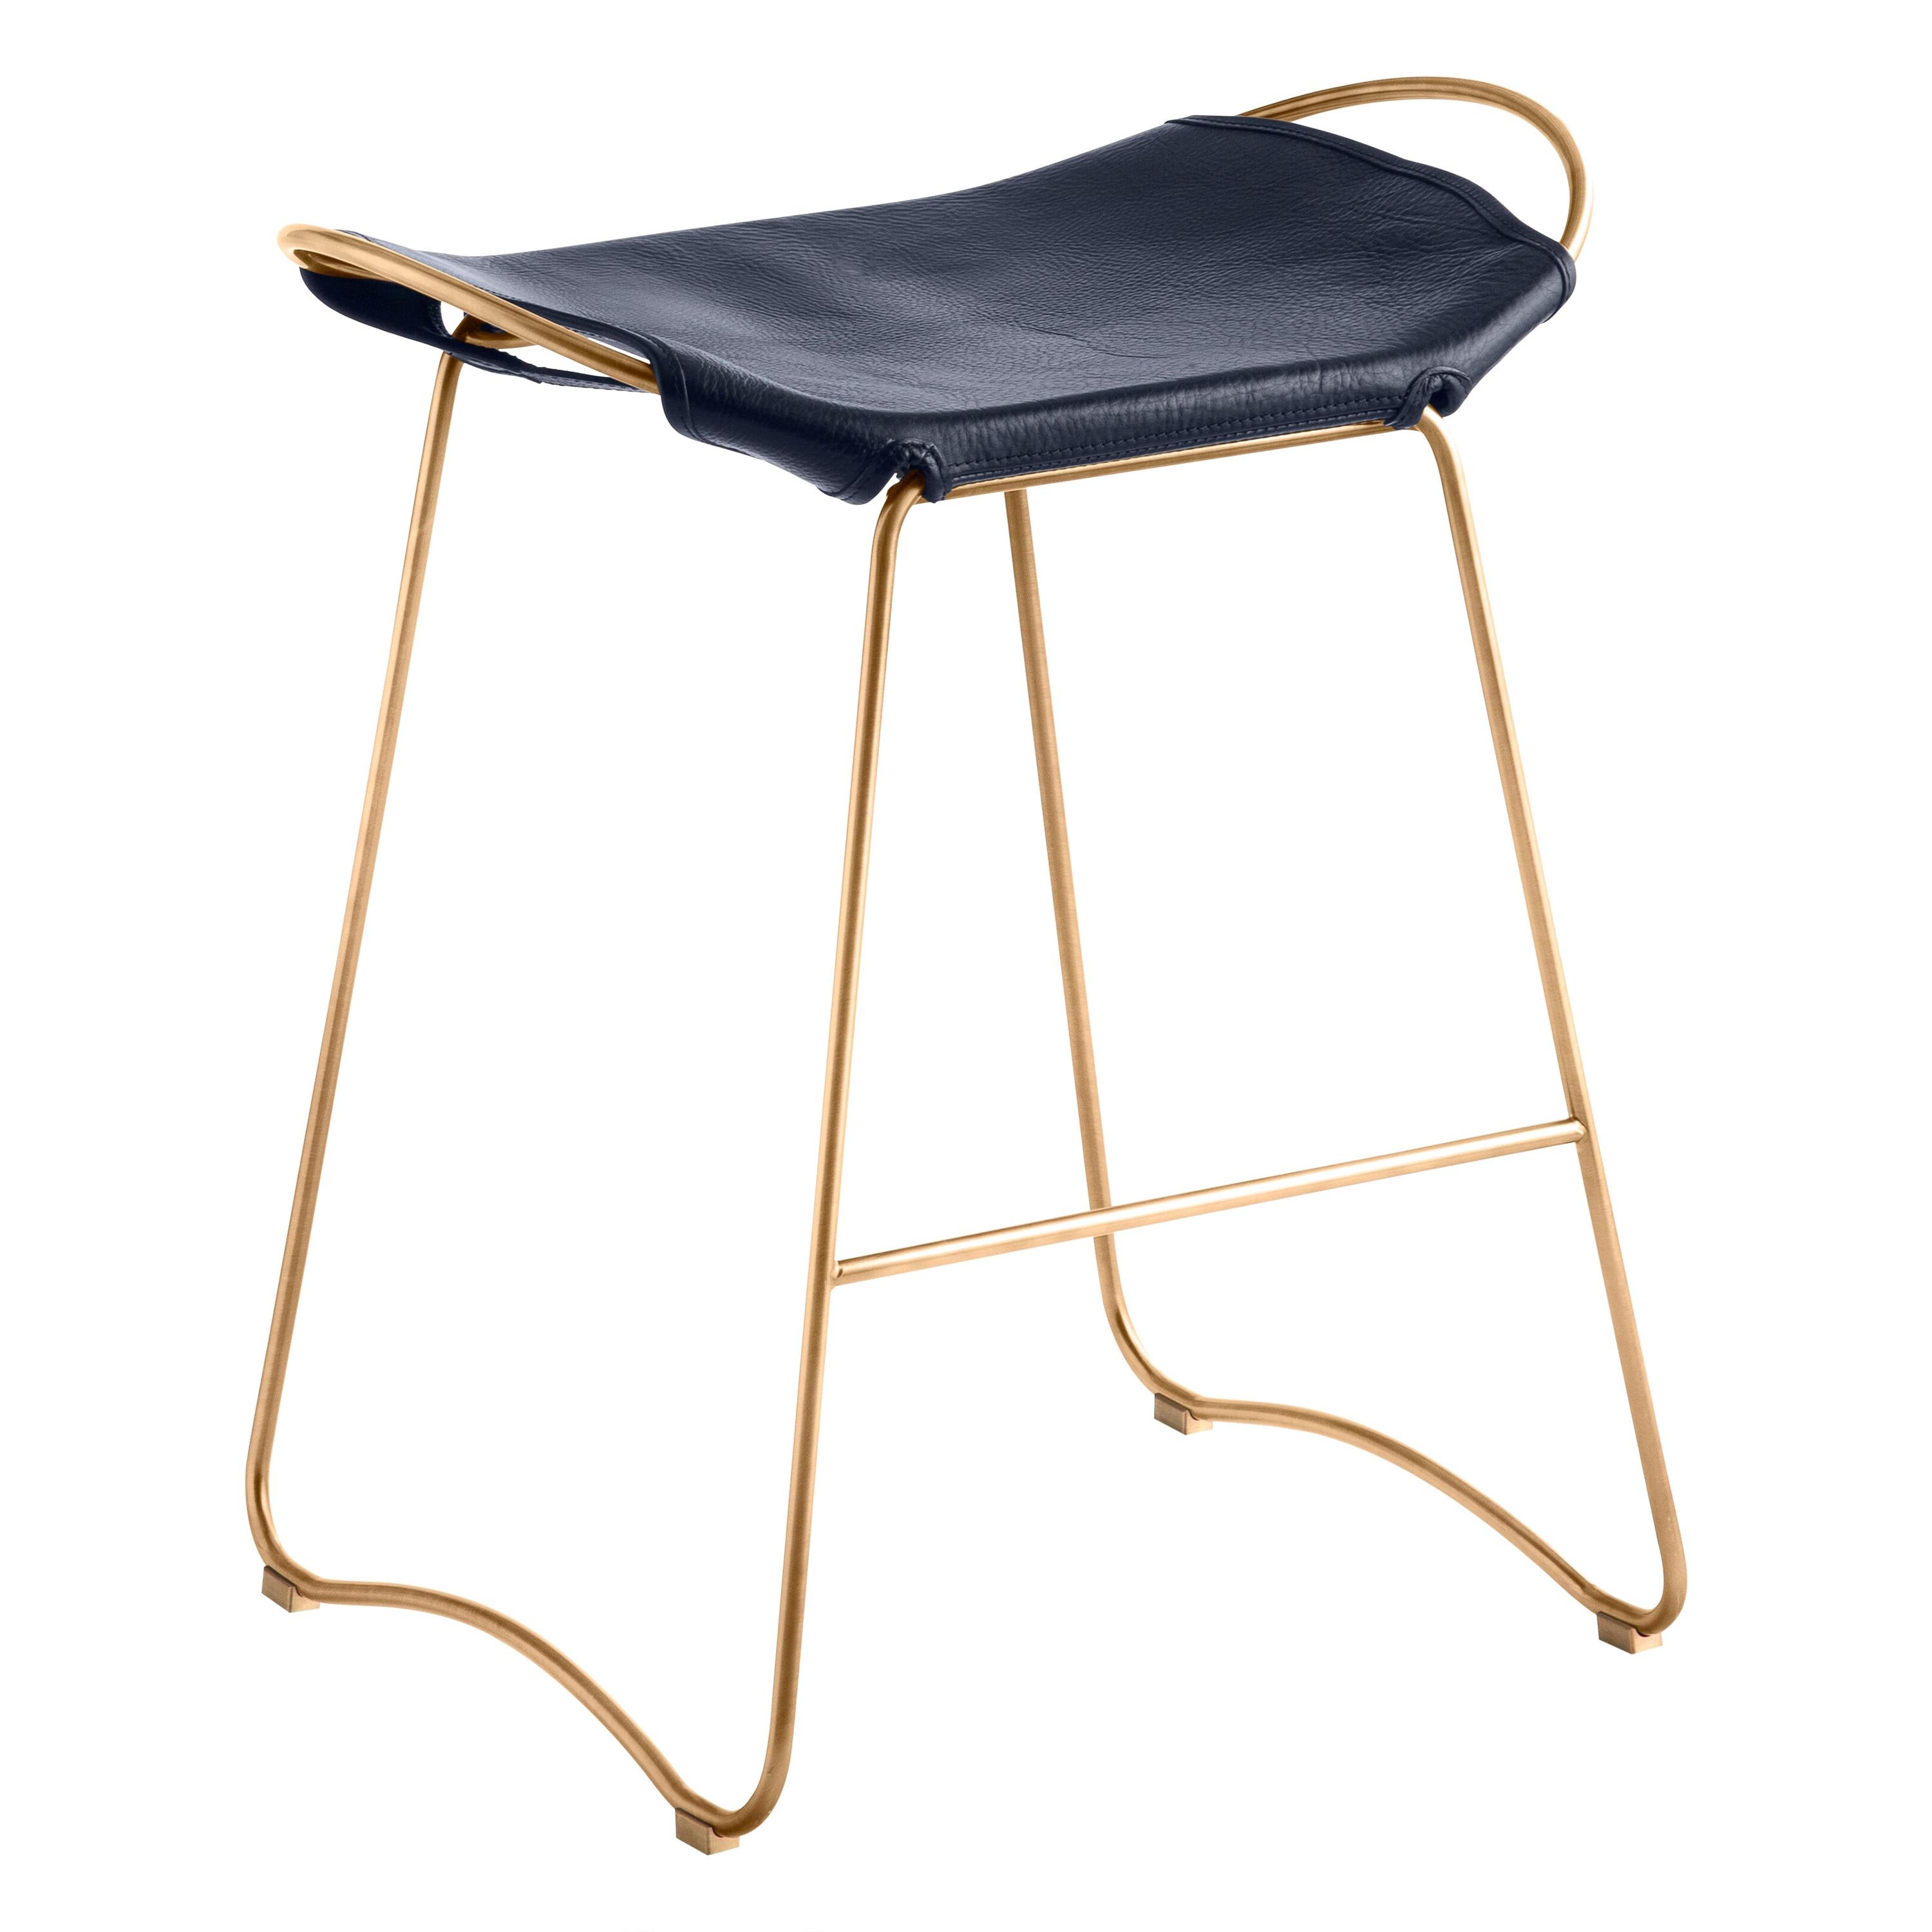 Sculptural Organic Contemporary Bar Stool Aged Brass Metal & Navy Blue Leather For Sale